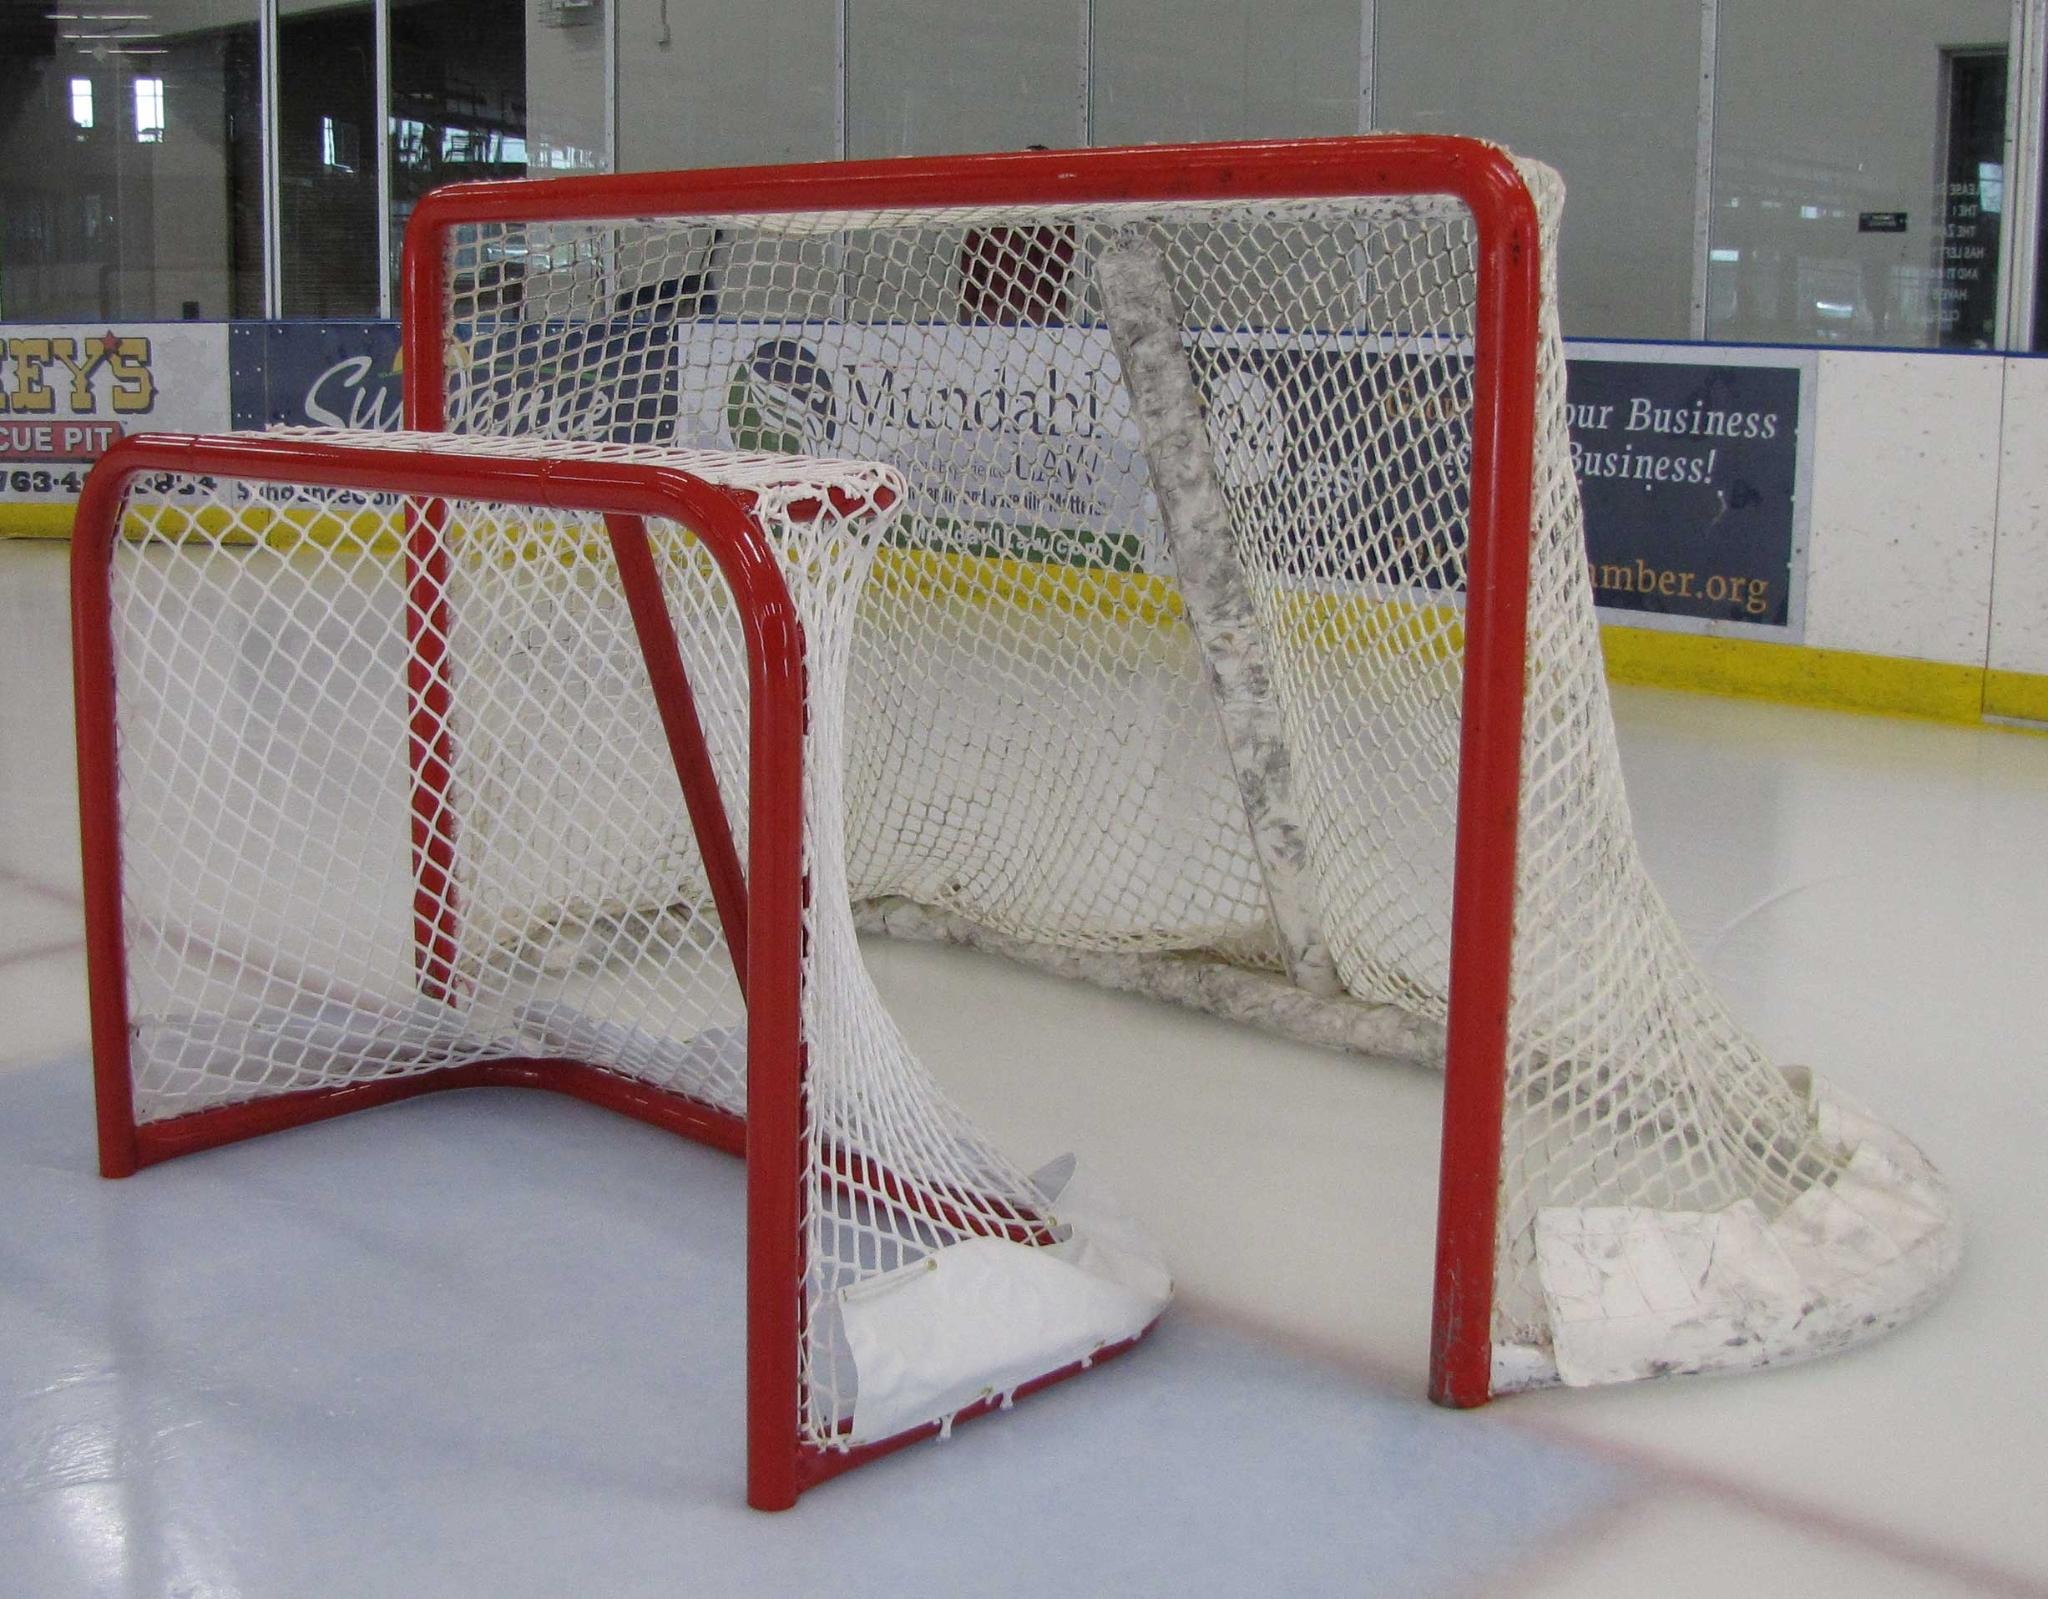 4'6" x 3' Cross-Ice Steel Hockey Goal Frame; 24” Rectangular Base Depth; Welded Lacing Bar for Attaching Net; Red Powder-Coated Finish; Age 8U Players.